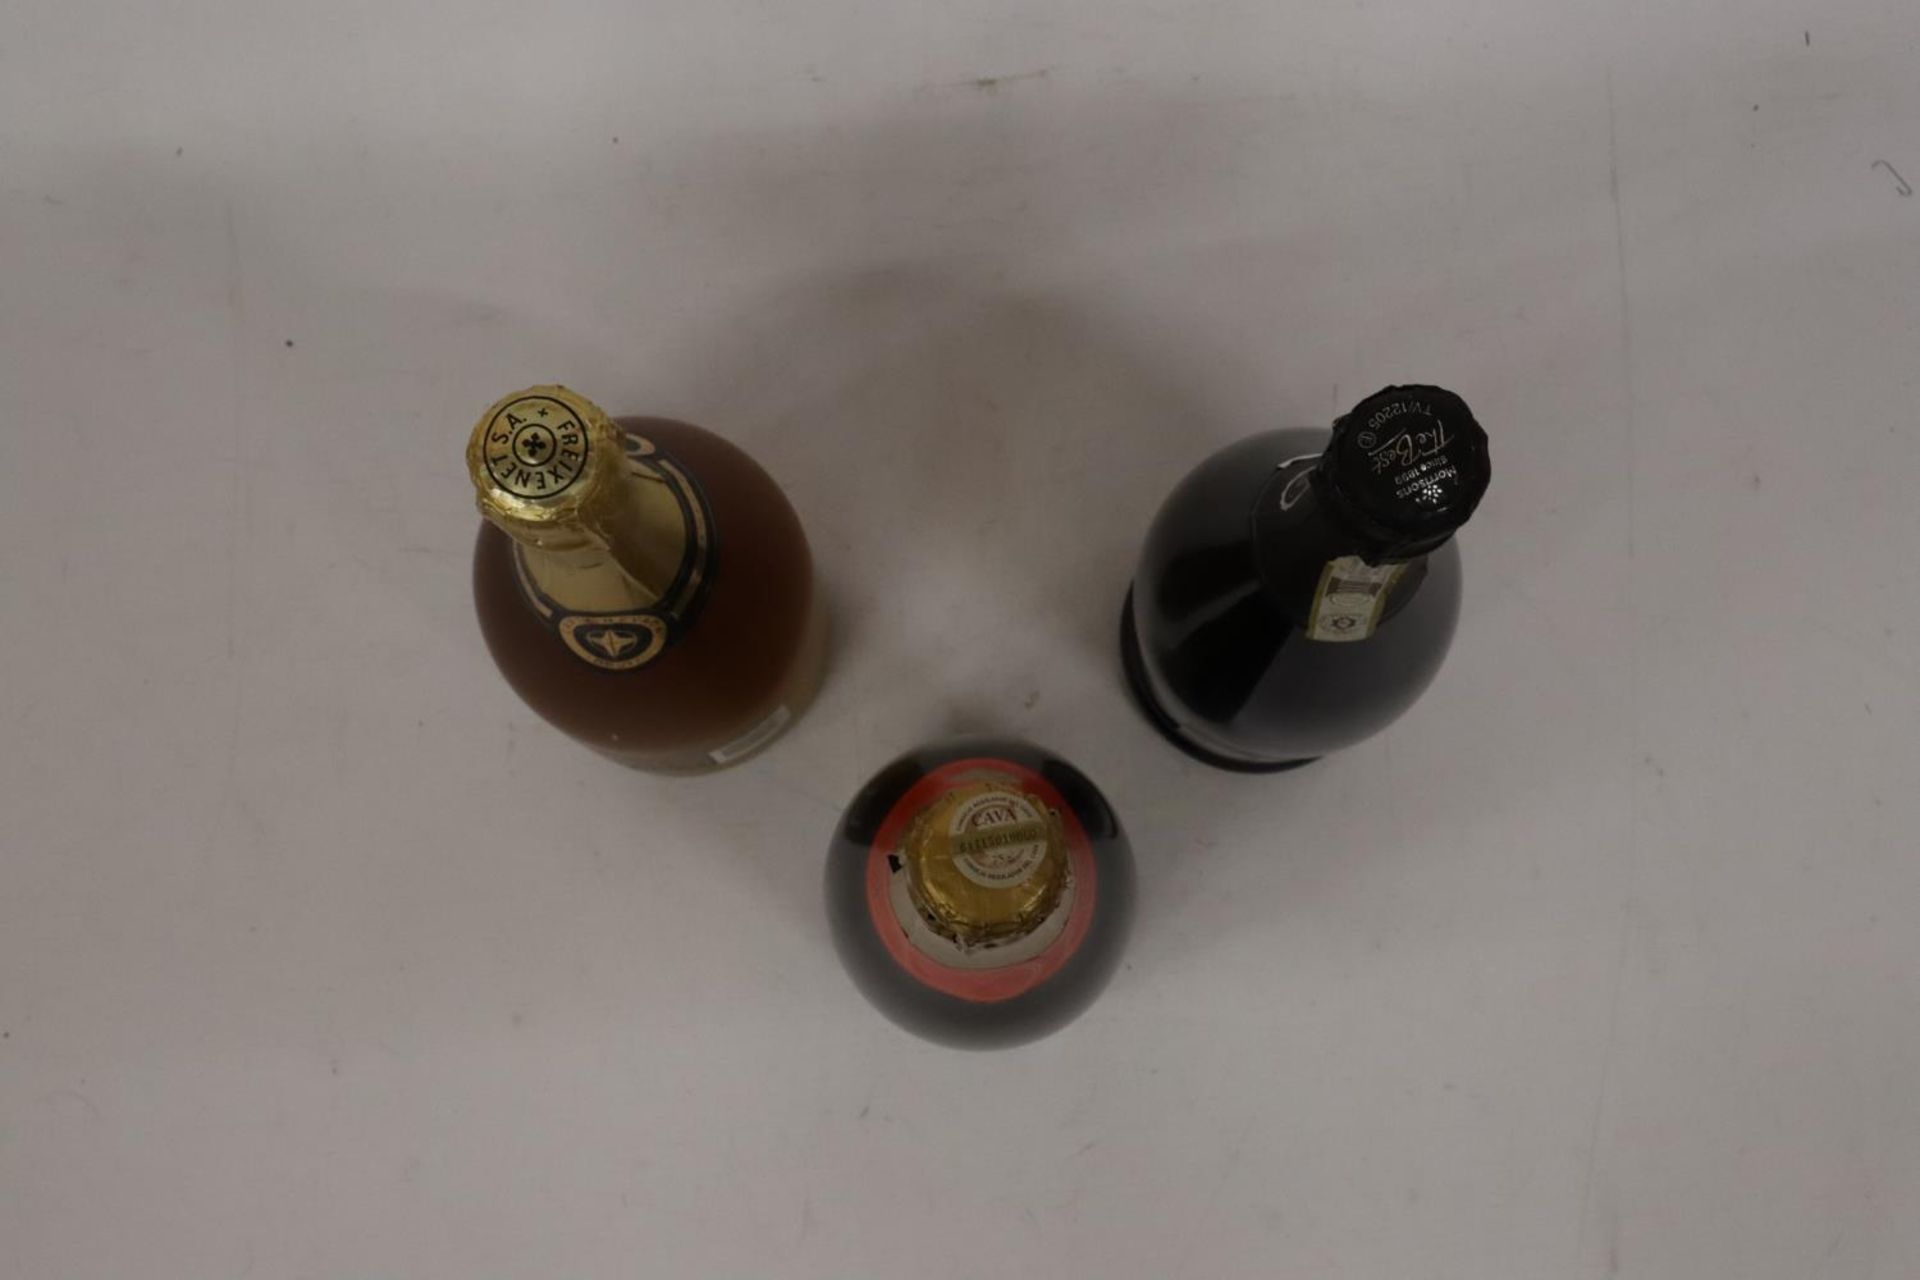 THREE 75CL BOTTLES TO INCLUDE A BOTTLE OF CAVA, A BOTTLE OF FREIXENET CARTA NEVADA BRUT AND A BOTTLE - Image 3 of 3